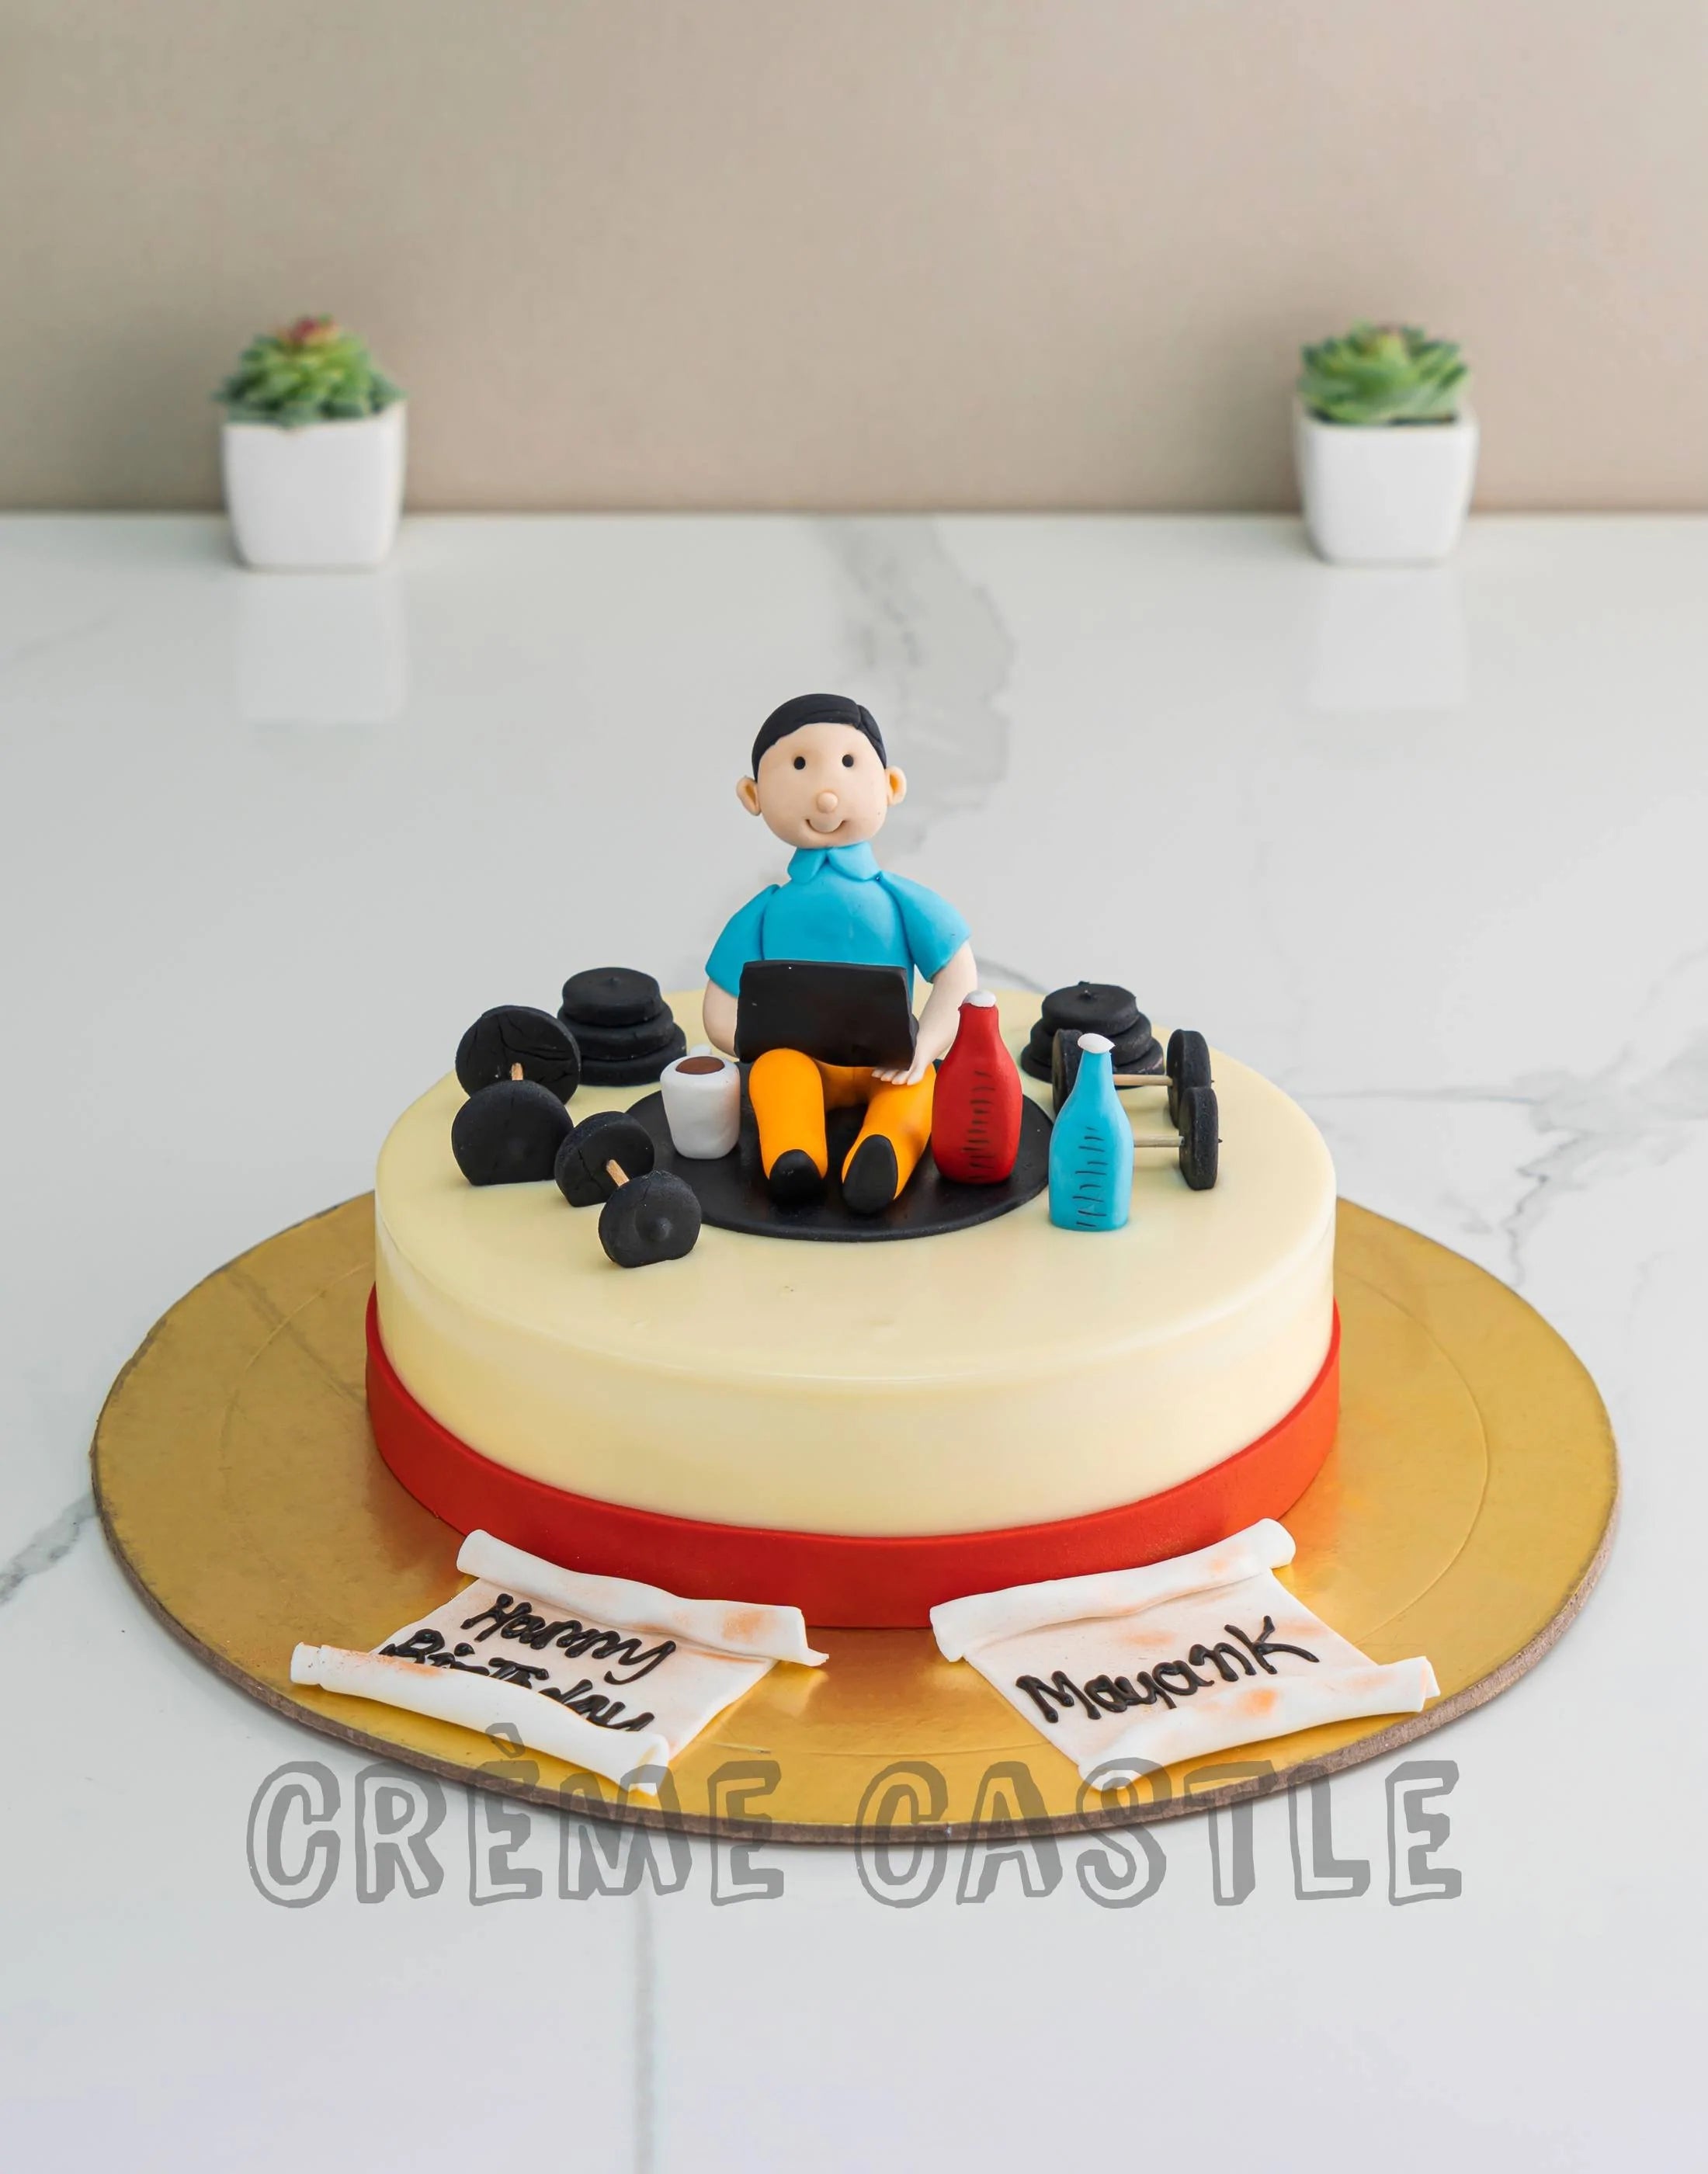 Gym Theme Cake - Perfect for Fitness Enthusiasts